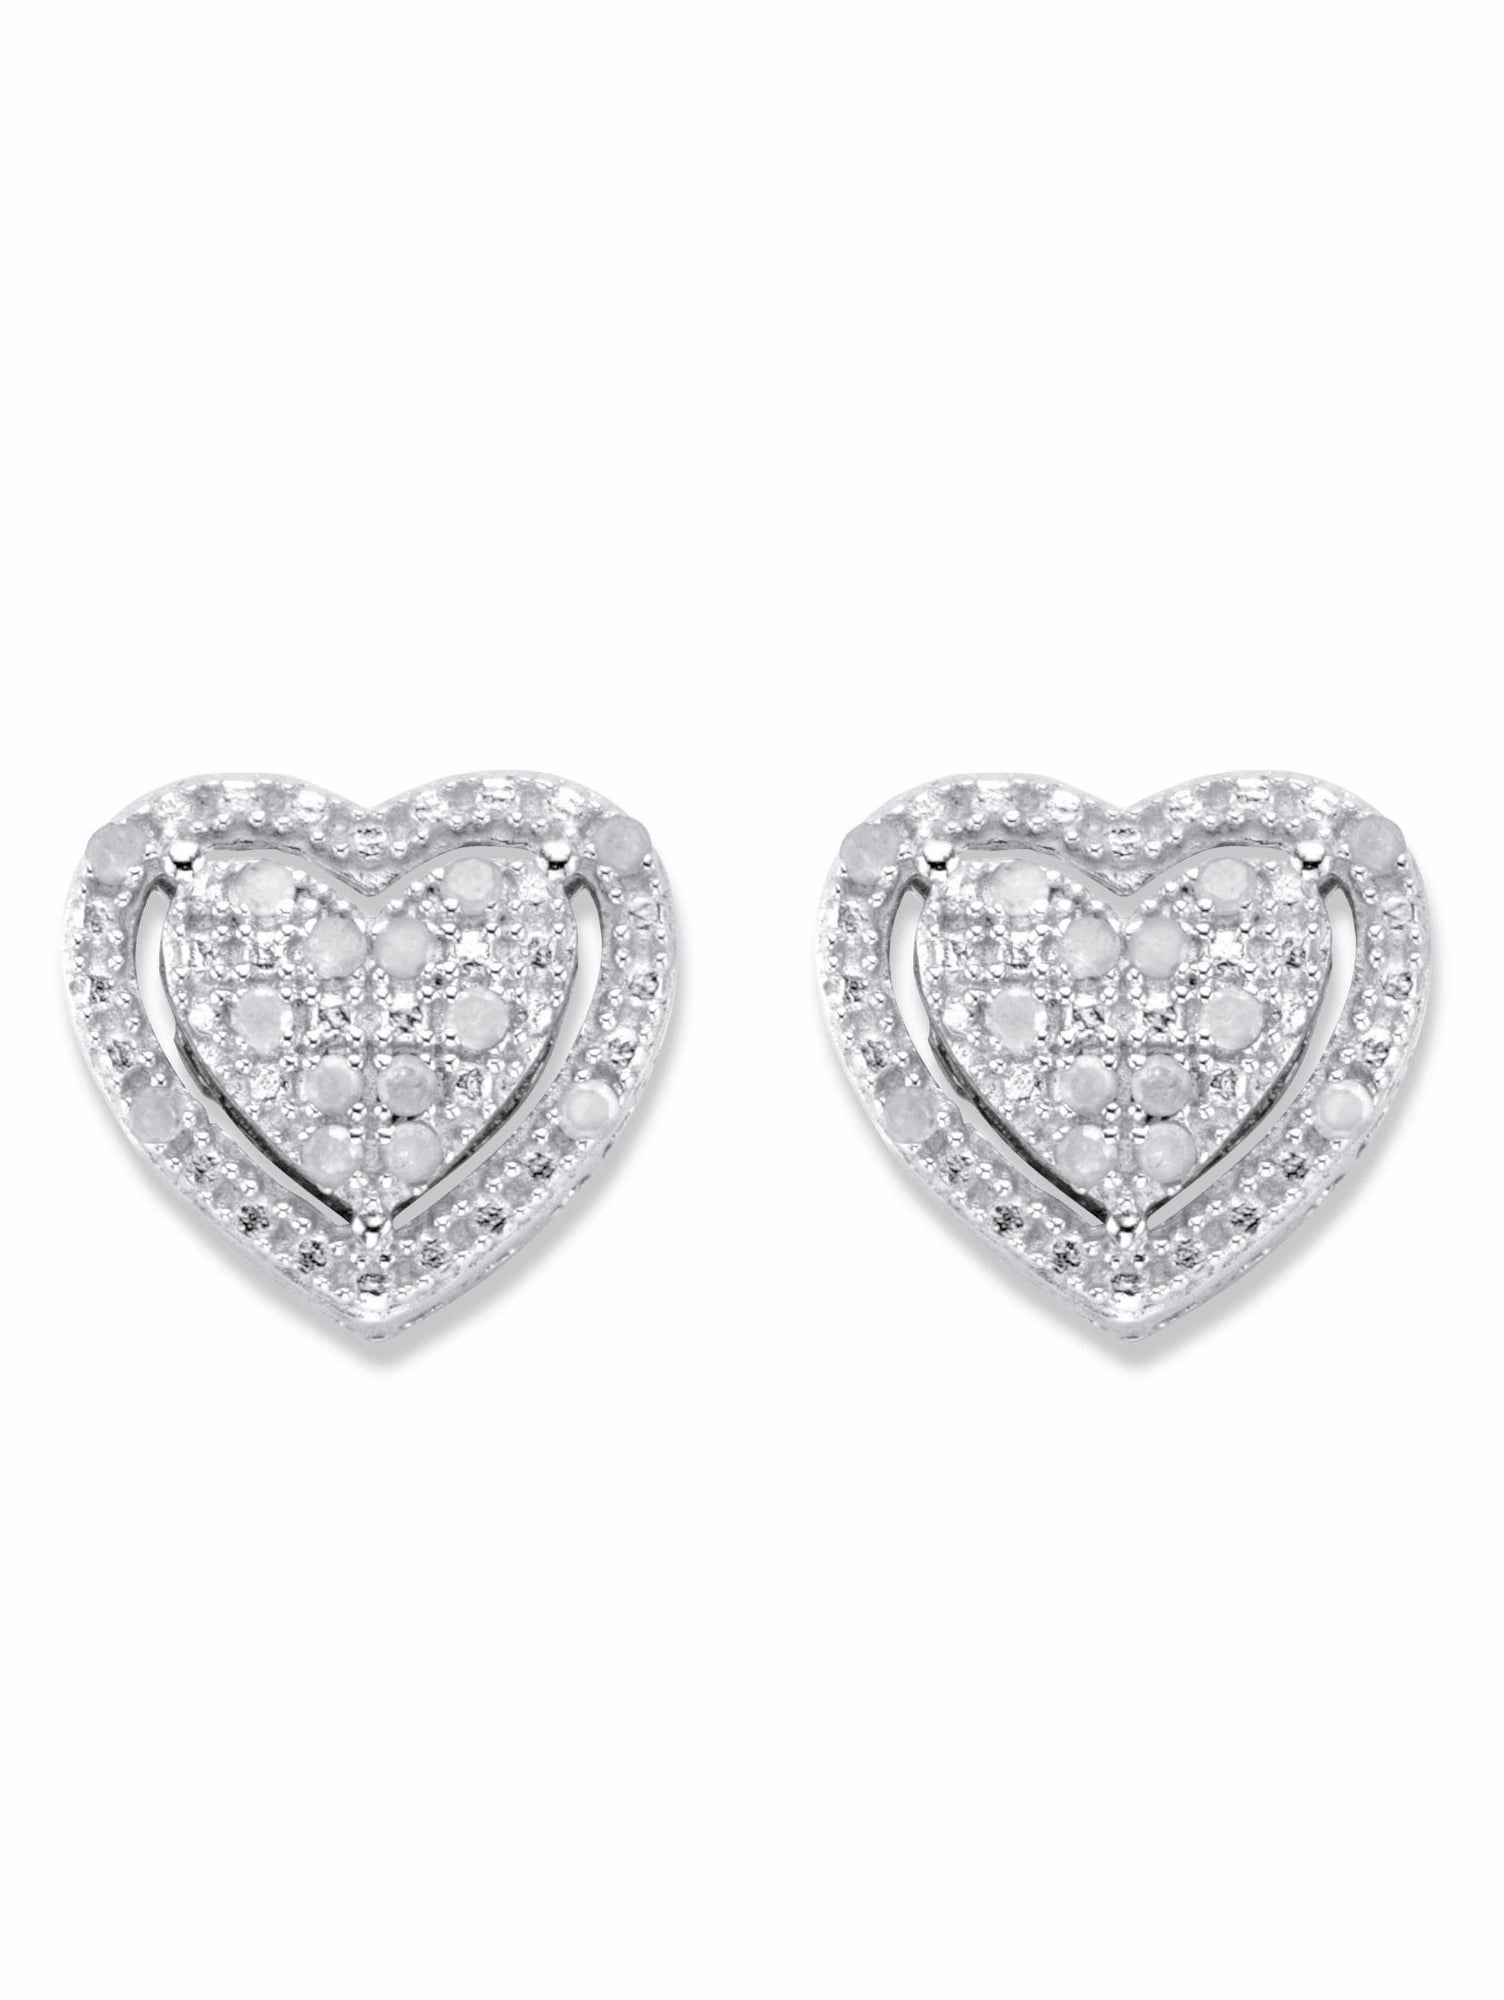 Round Cut White Cubic Zirconia Heart Stud Earrings in14K Rose Gold Over Sterling Silver 0.3 cttw 